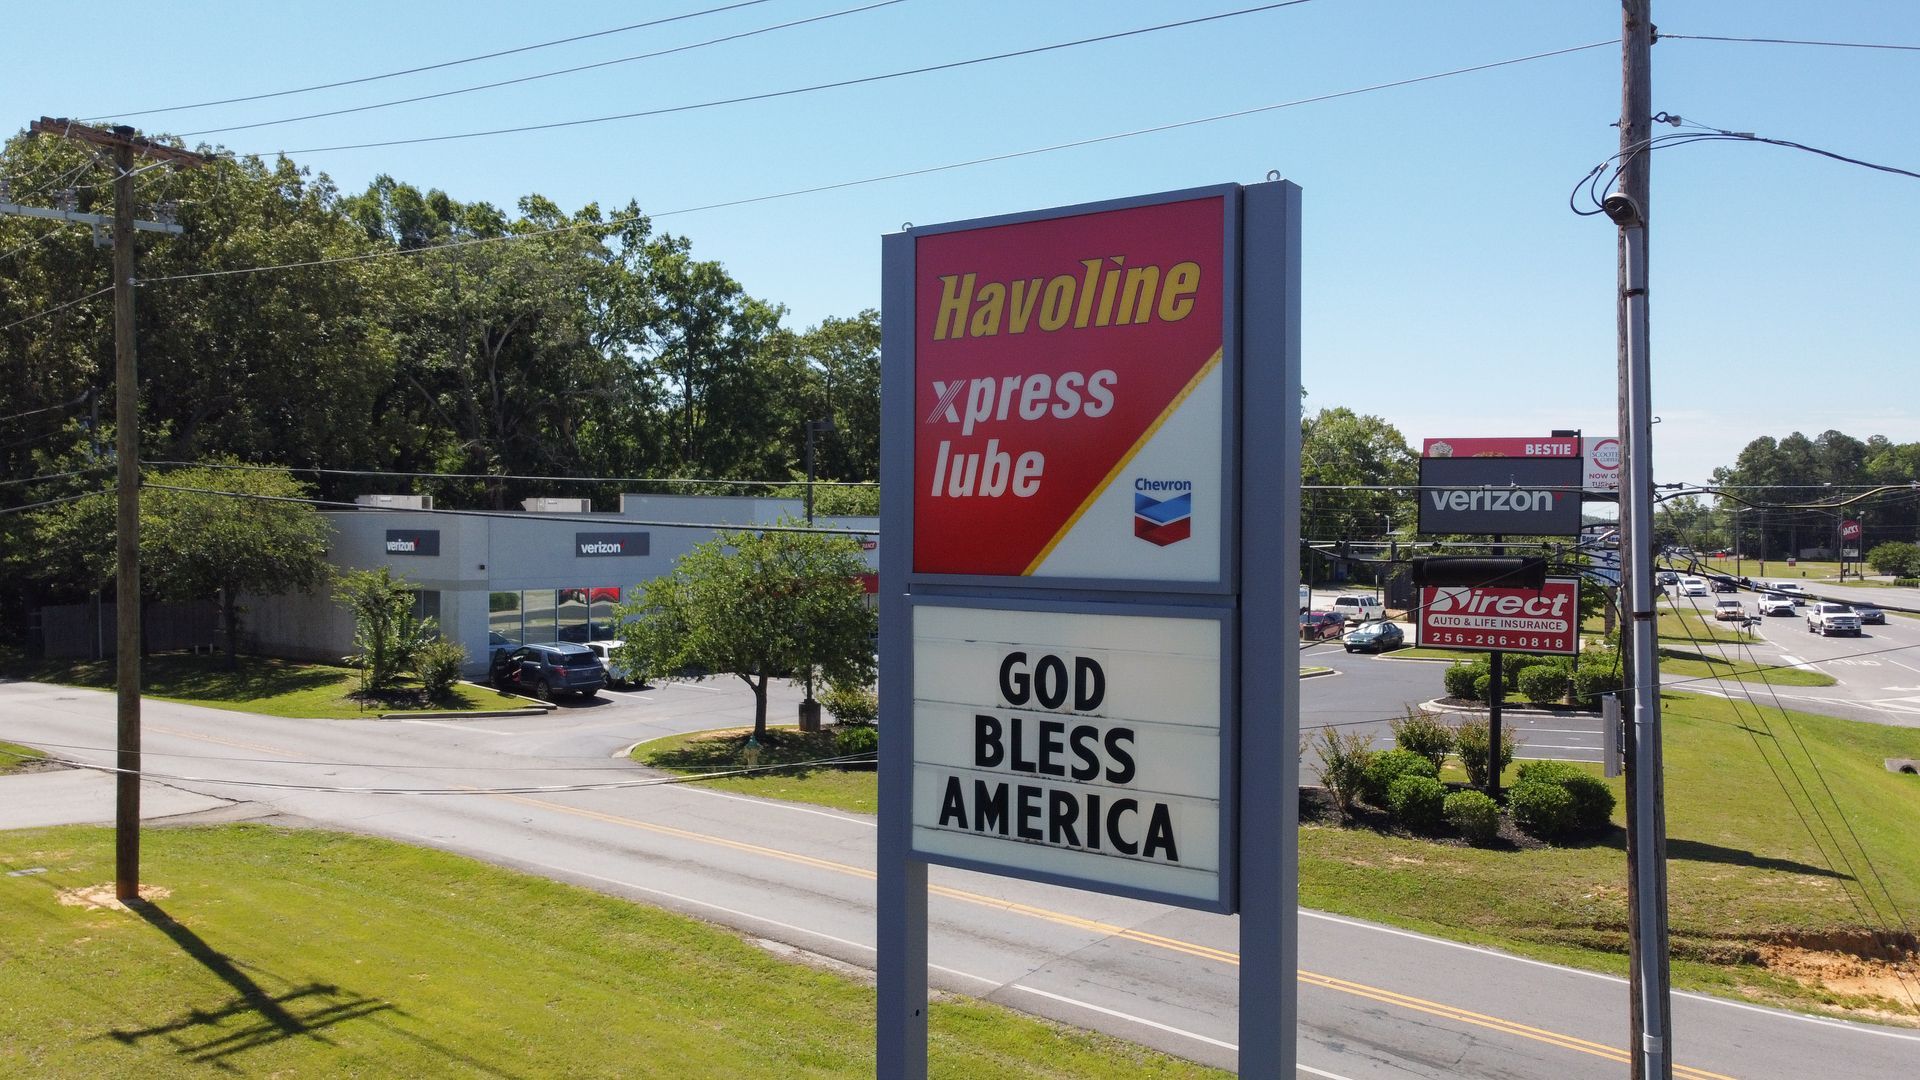 A sign for havoline express lube says god bless america